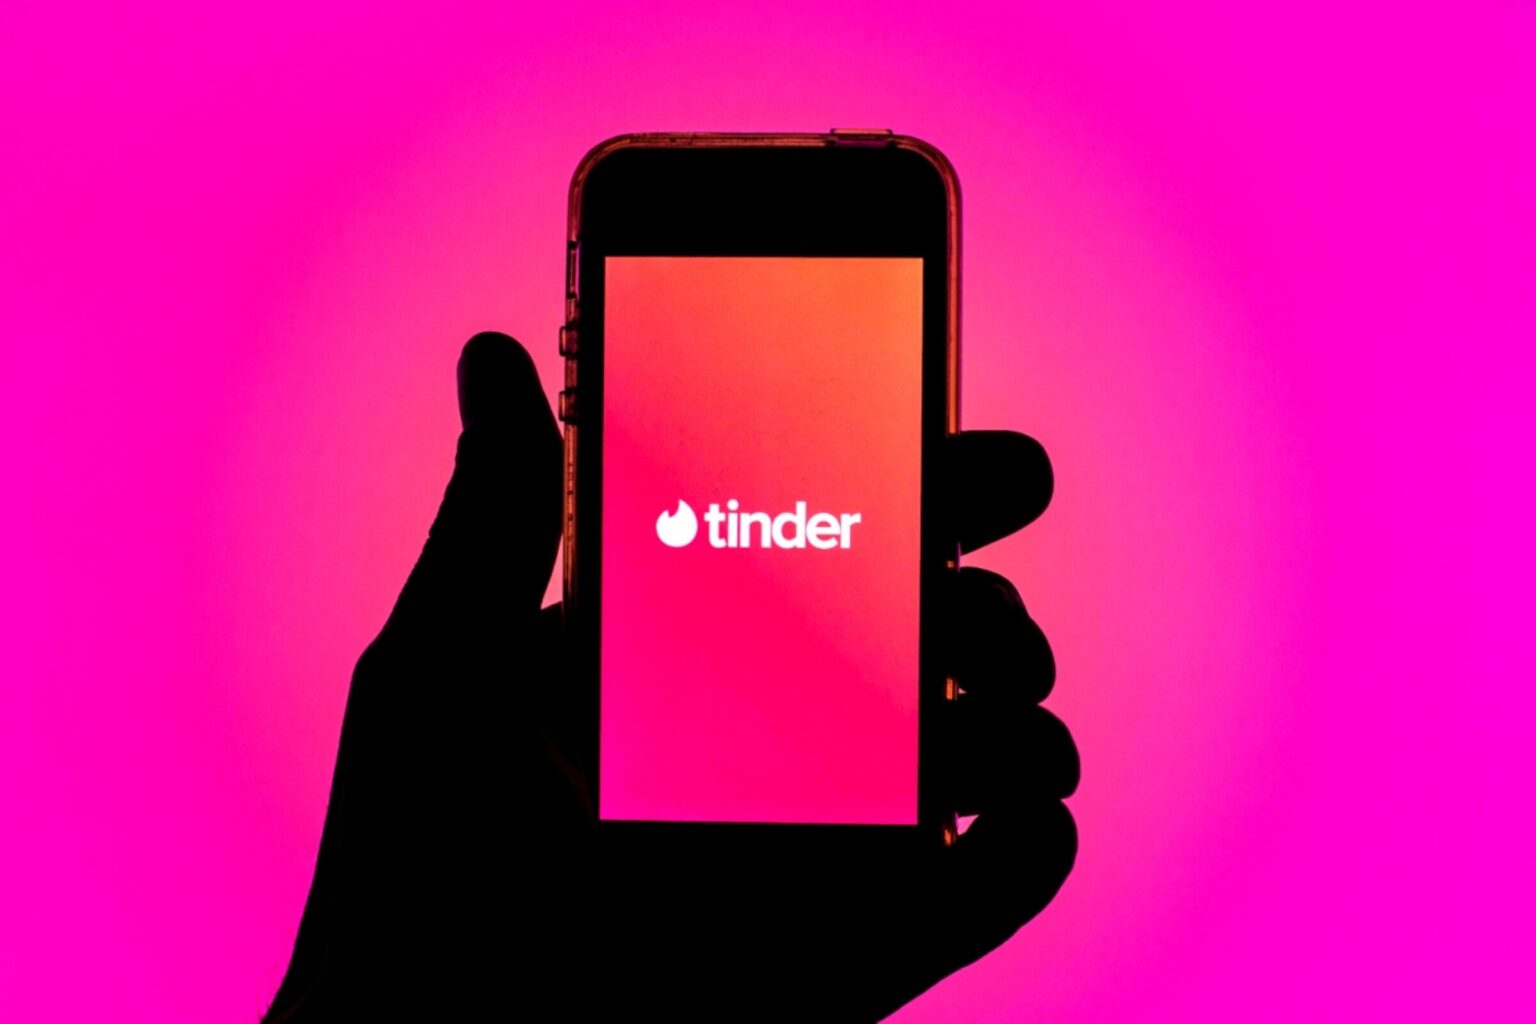 The next time you’re on Tinder, you’ll know what to say and you’ll have fun starting a conversation. This information is crucial so don't miss out!